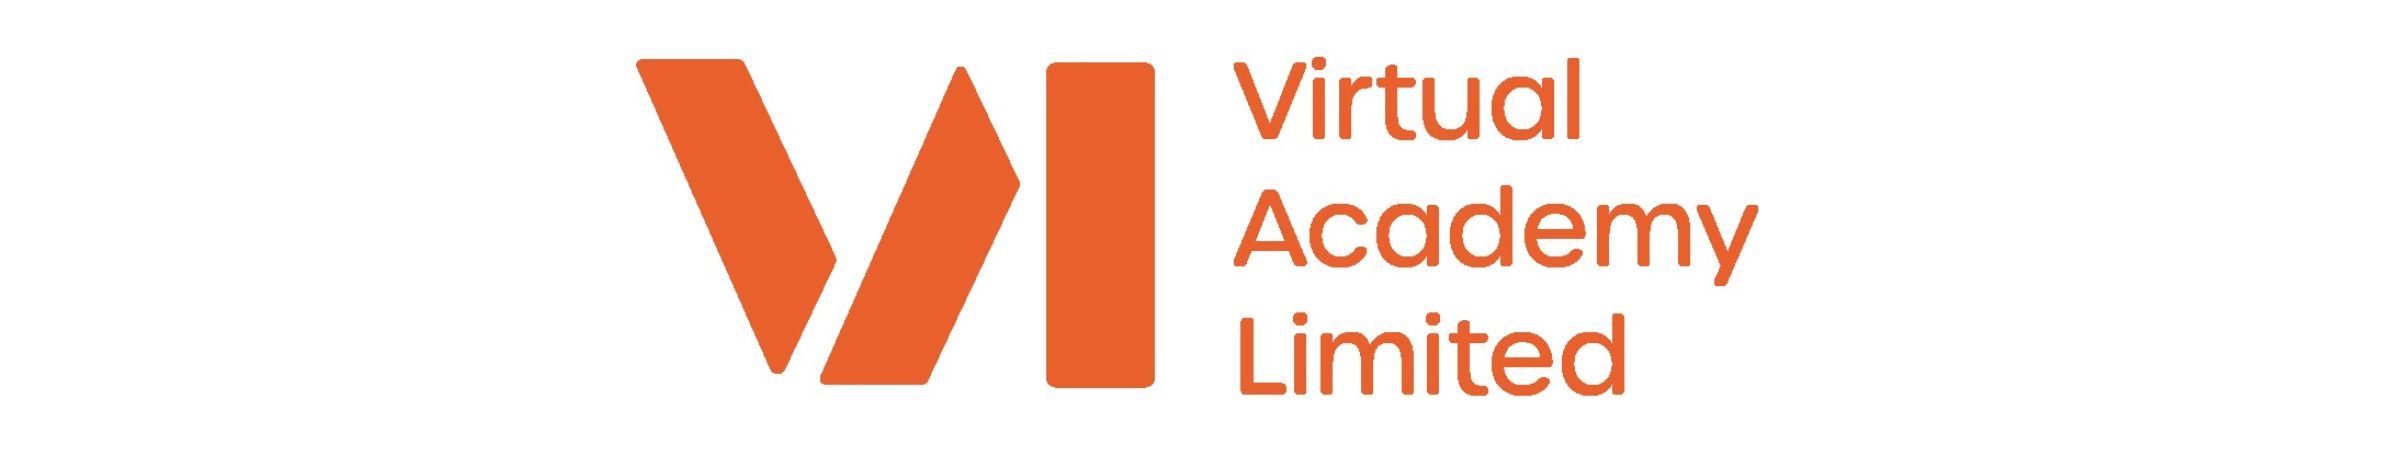 Virtual Academy Limited (VAL)